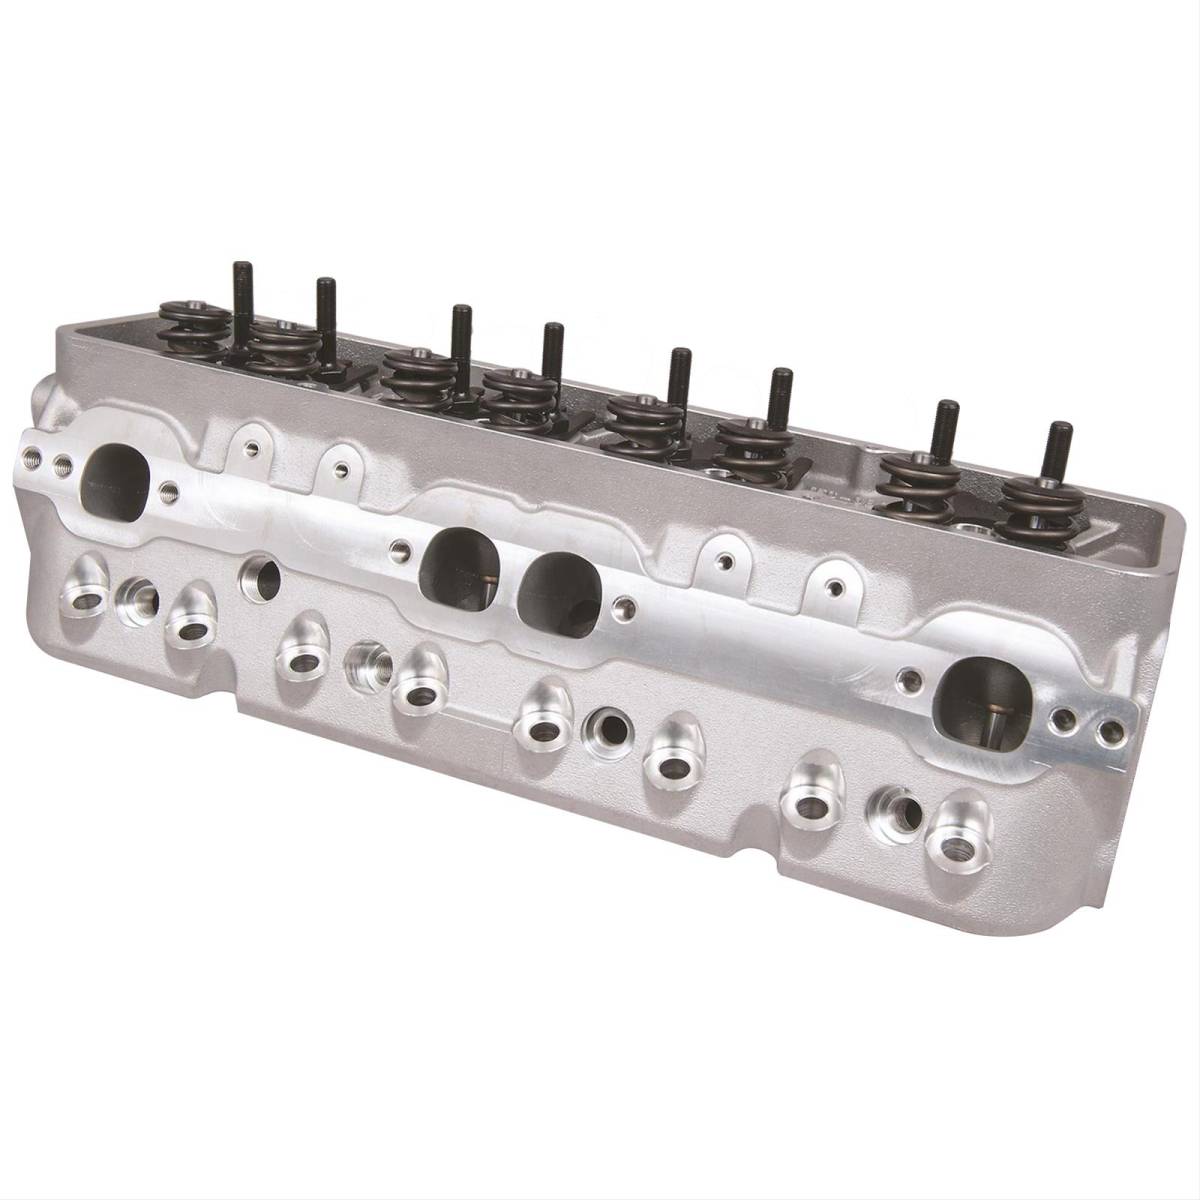 Trickflow - Trickflow Super 23 Cylinder Heads, SB Chevy, 195cc Intake, 64cc Chambers, 1.460" Dual Springs, Perimeter Bolt - Image 1